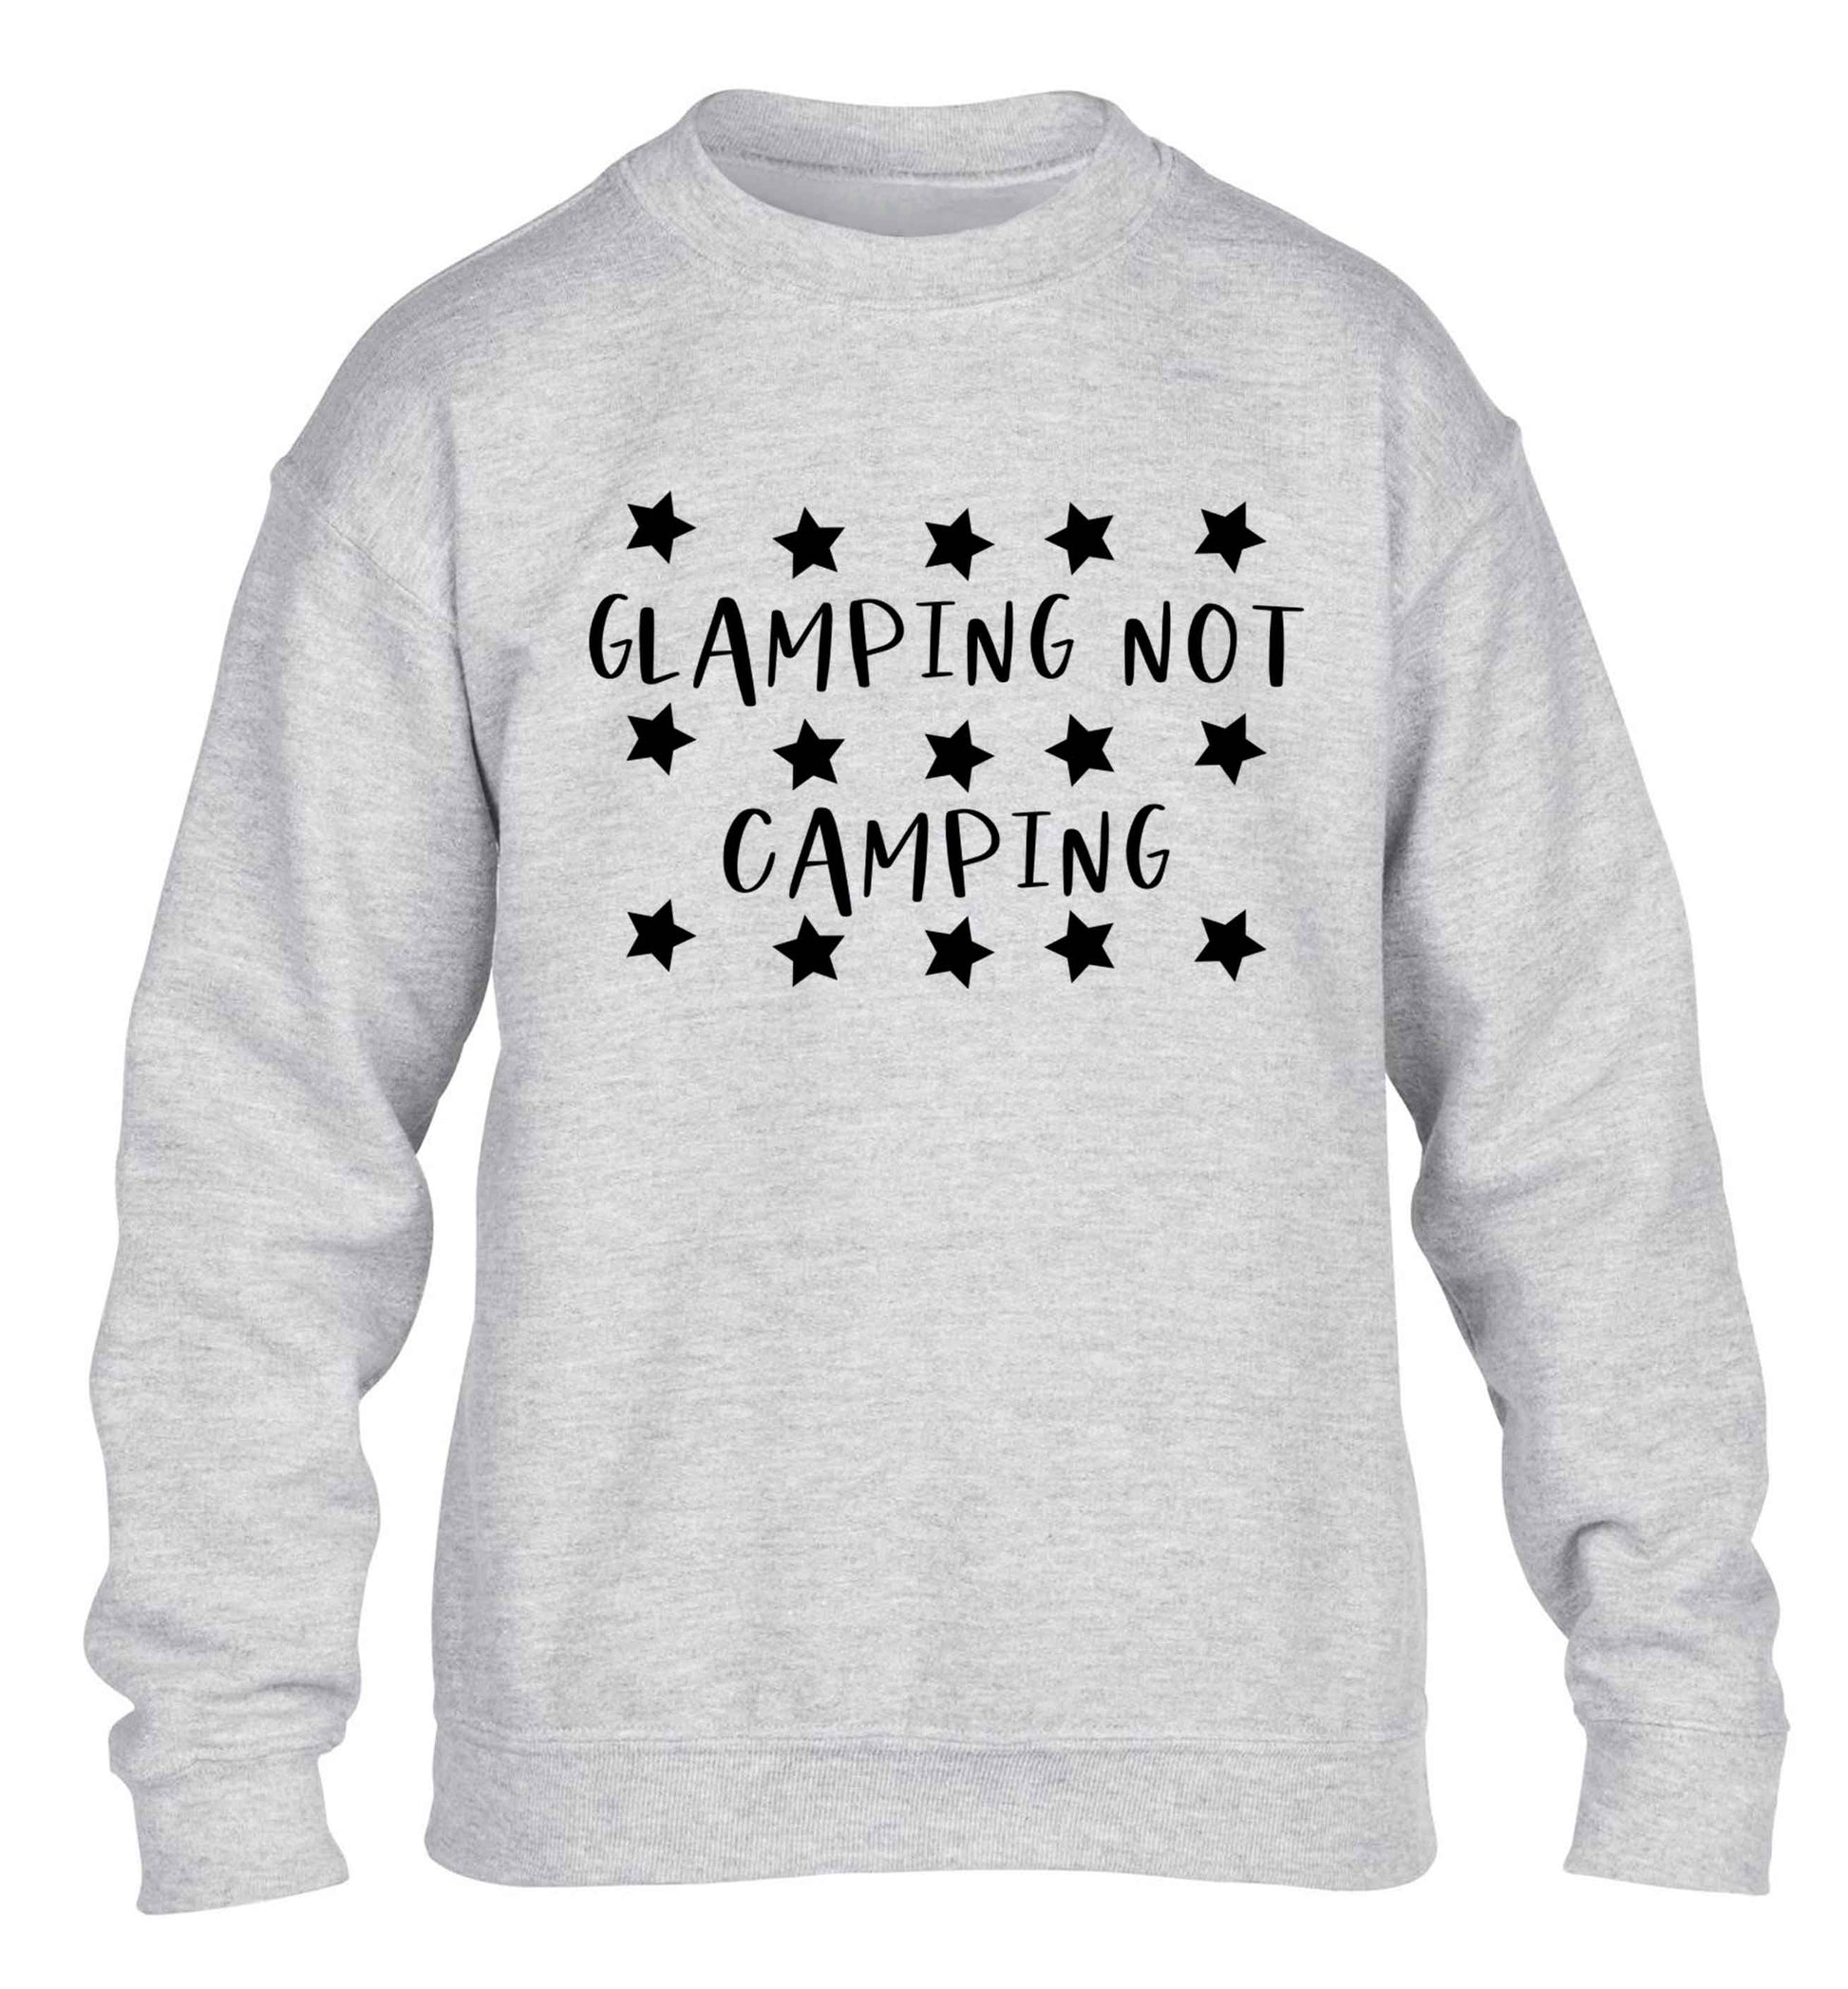 Glamping not camping children's grey sweater 12-13 Years